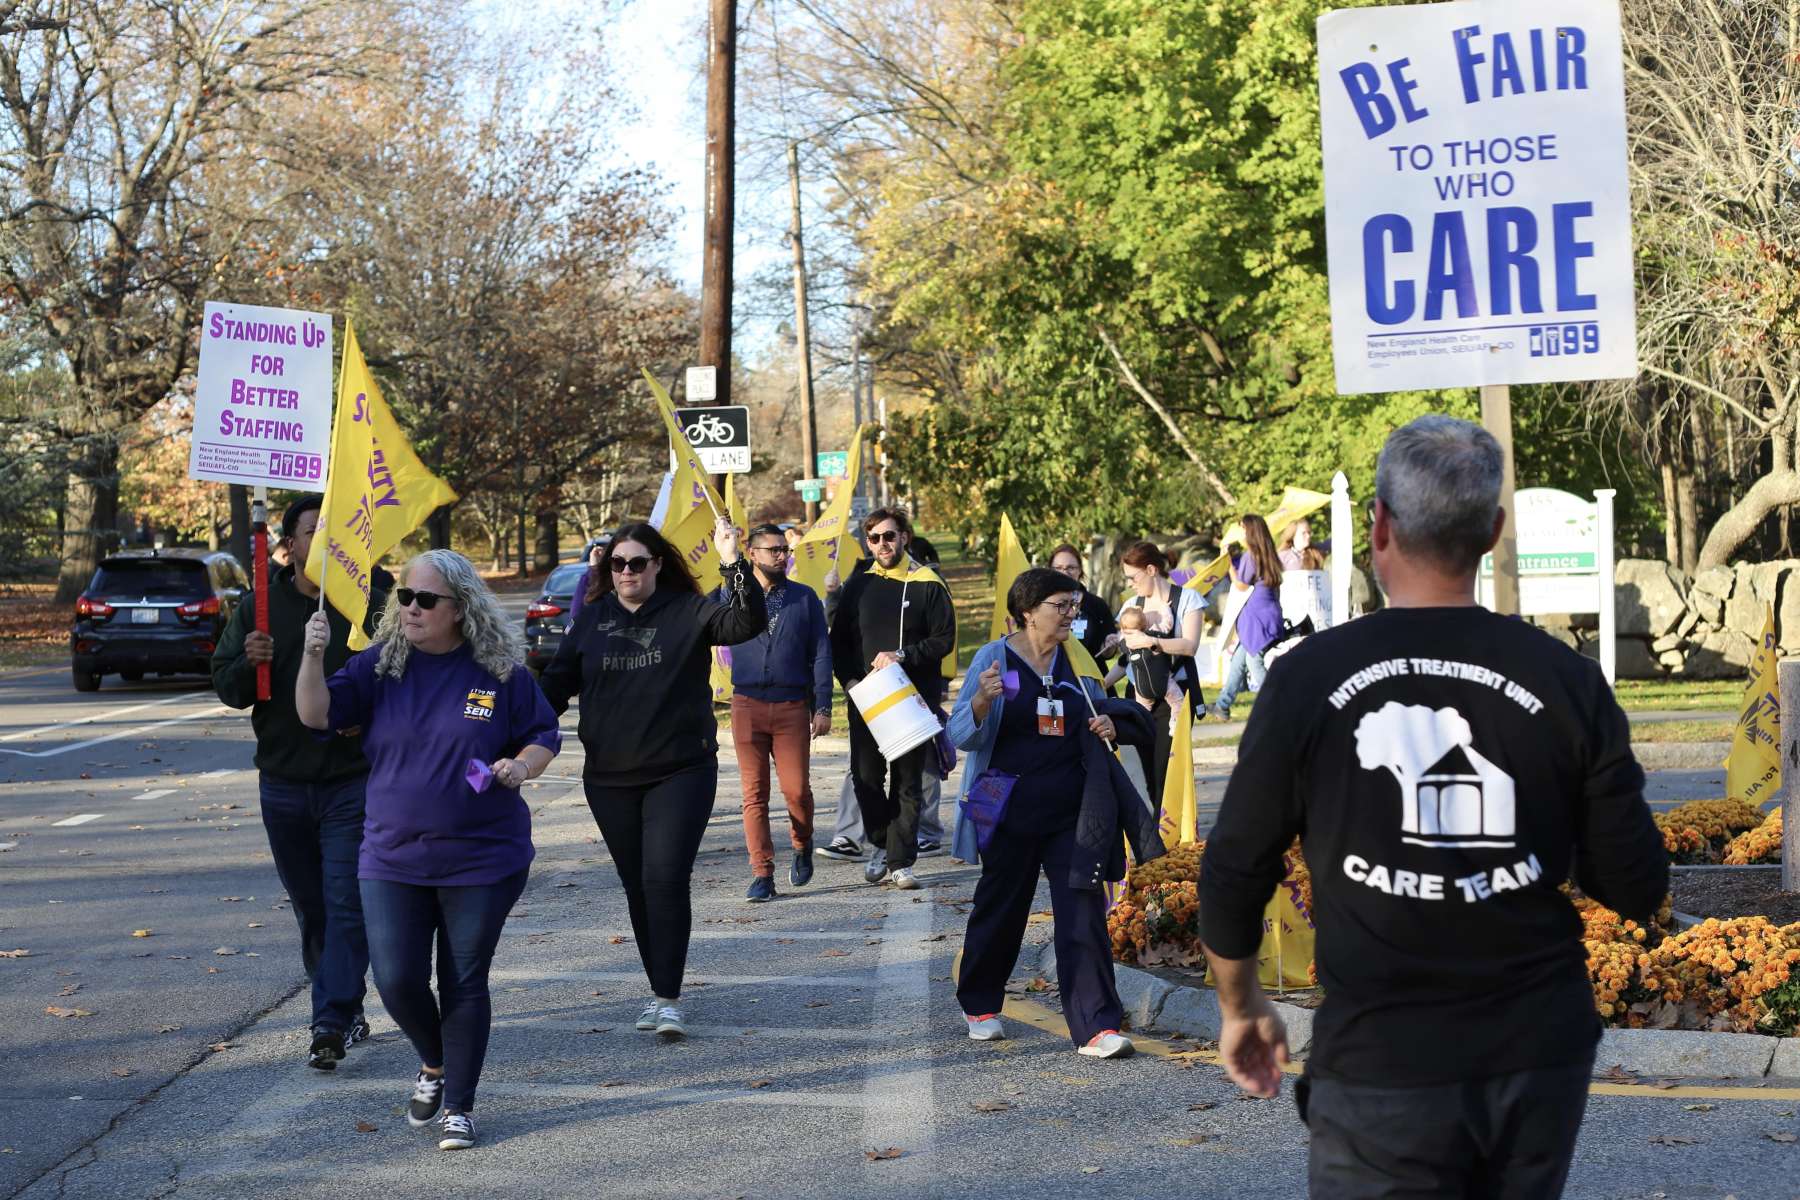 Rhode Island News: Butler Hospital workers picket over ARPA funds, staffing levels